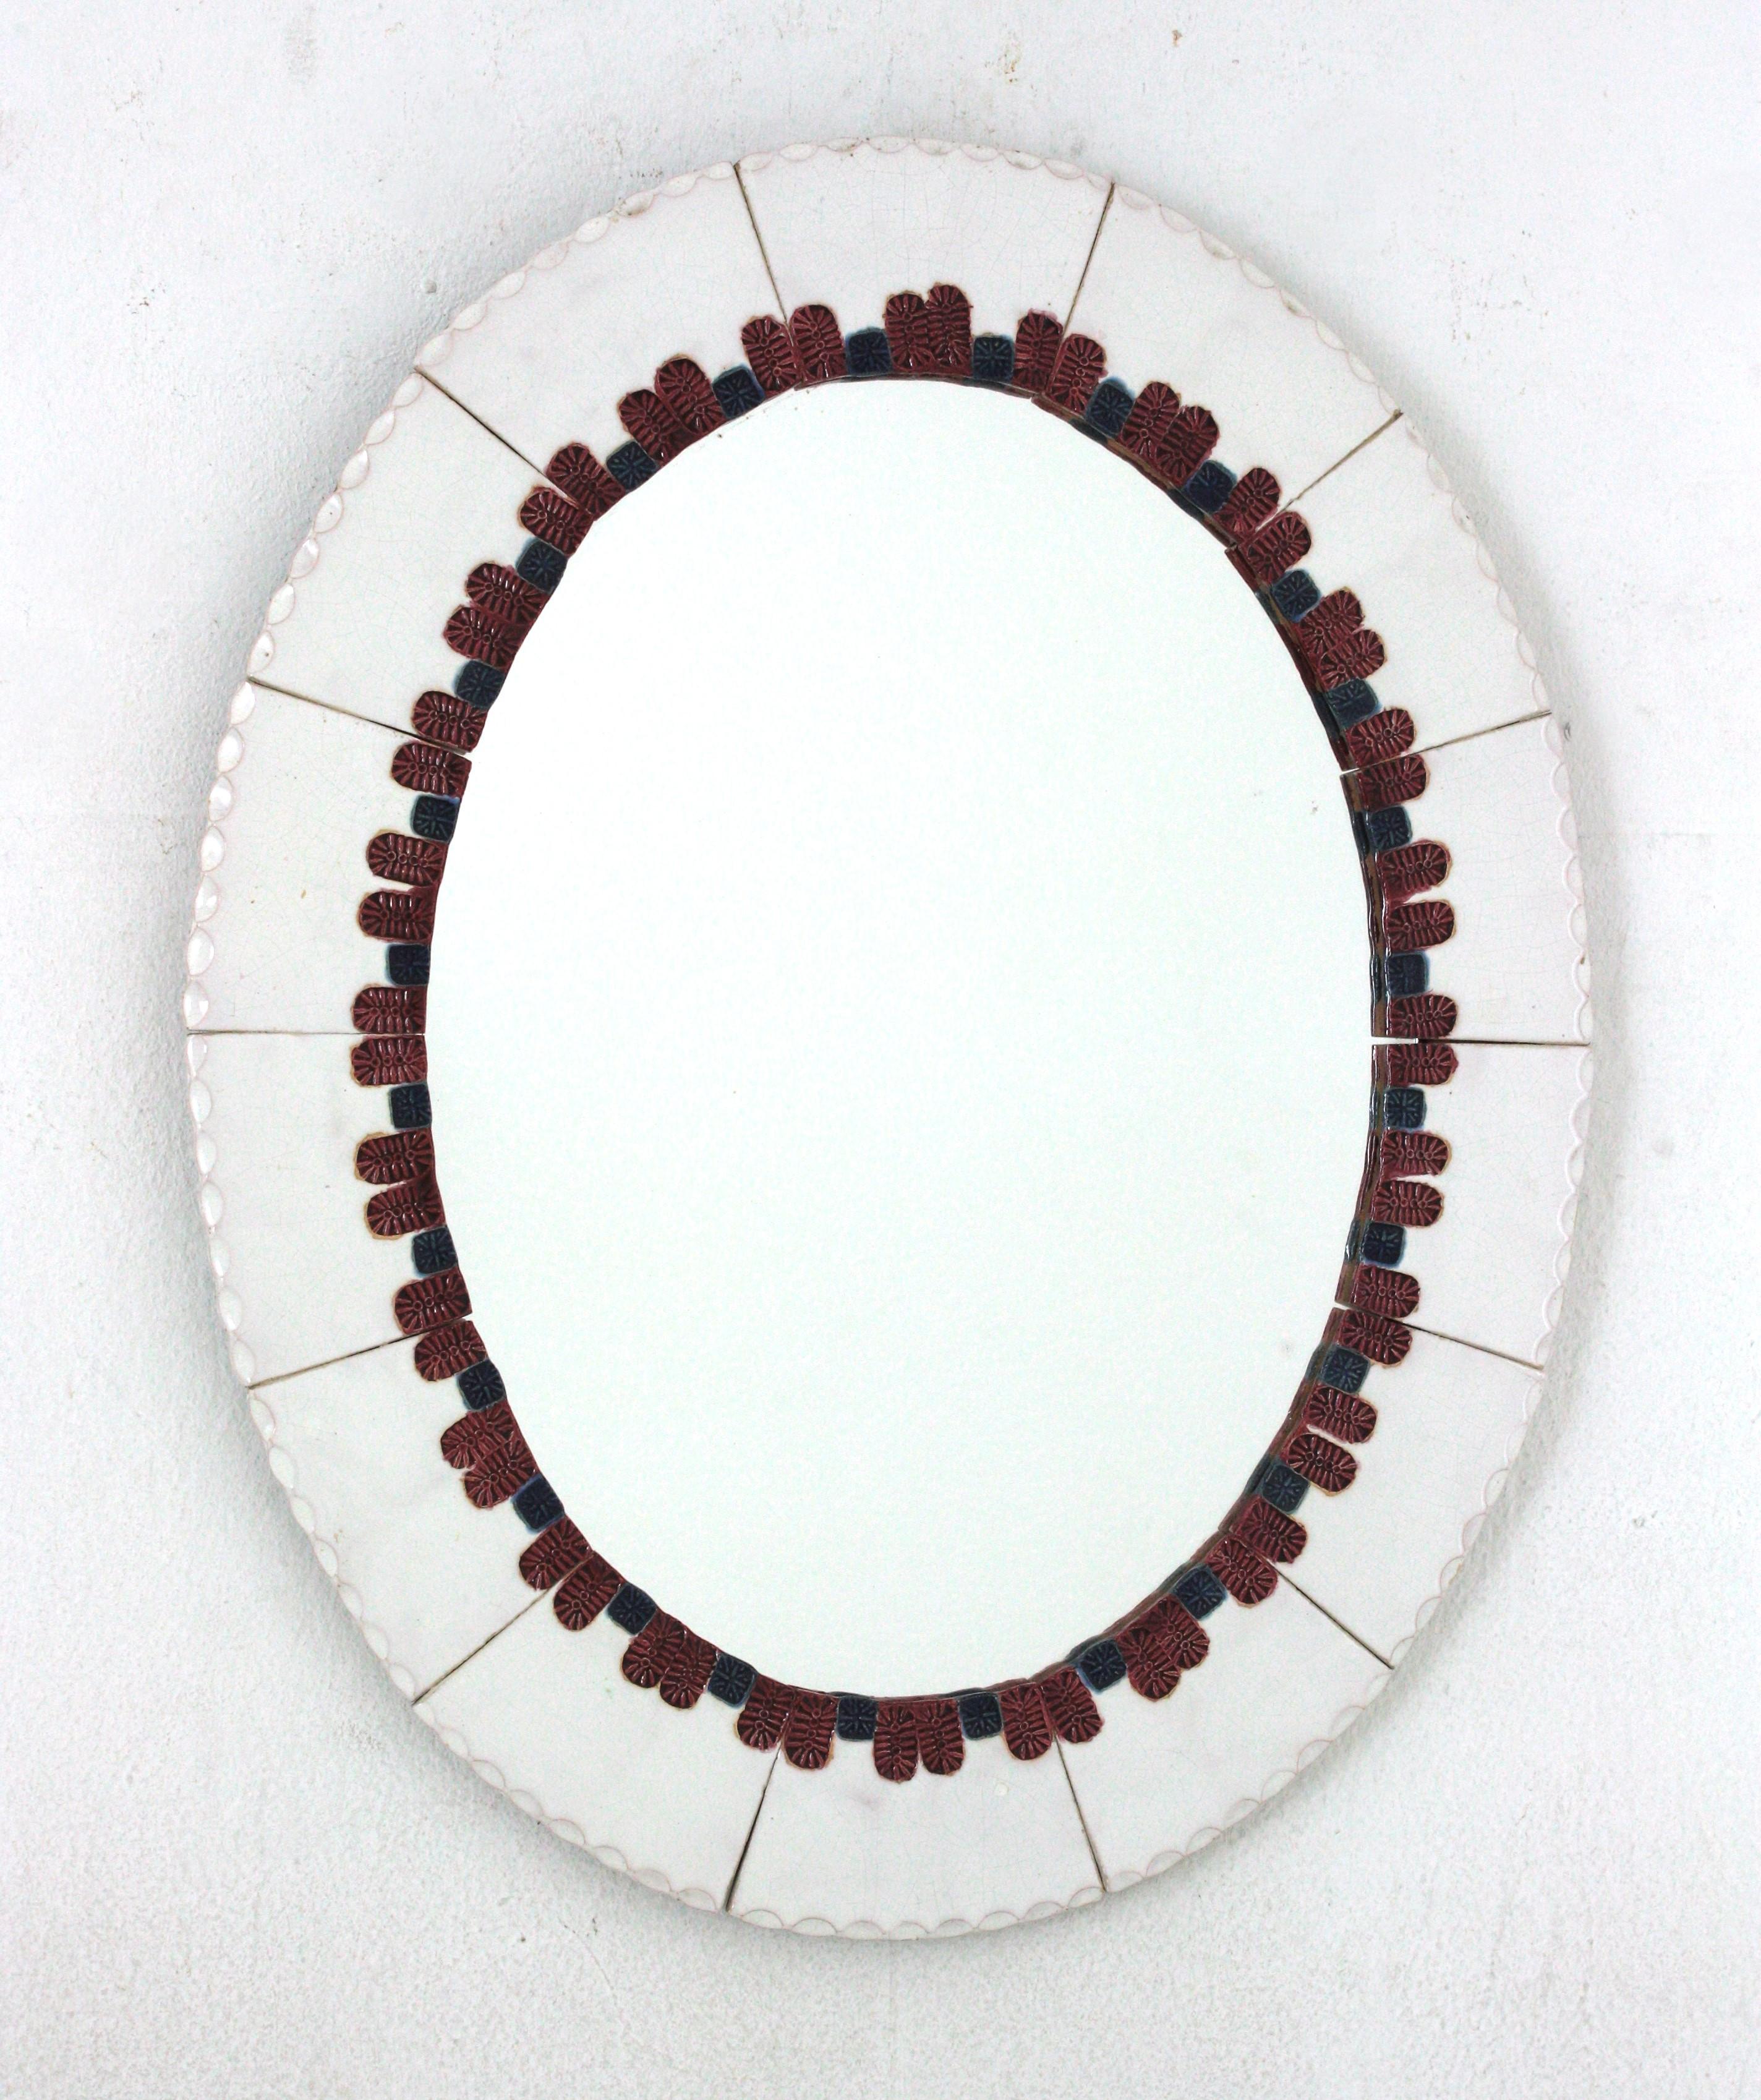 Eye-catching Mid-Century Modern ceramic mirror. Manufactured in Spain, 1960s.
Oval shape and colorful frame.
It is made of glazed ceramic tiles in white color. A decorative pattern in blue and pinkish red surrounds the glass mirror.
This wall mirror